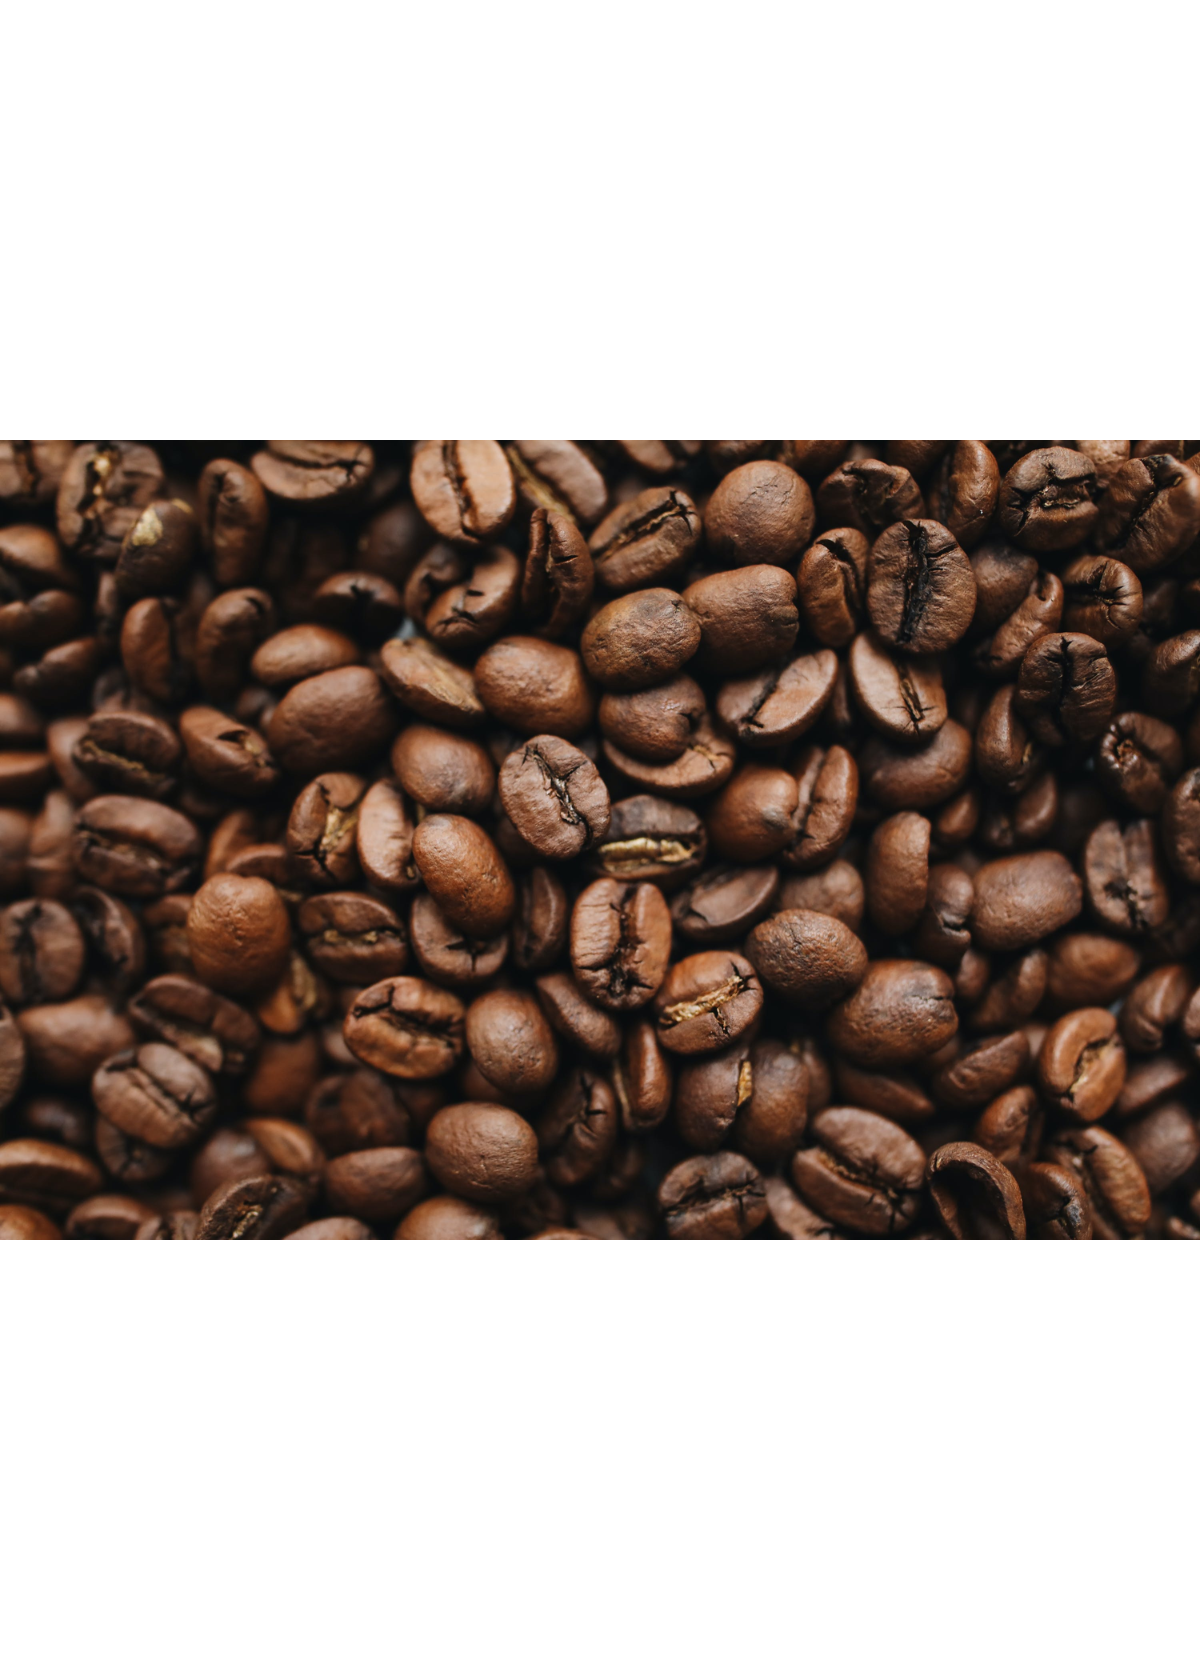 Discover the Best Dark Roast Coffee: Our Top 5 Picks Reviewed